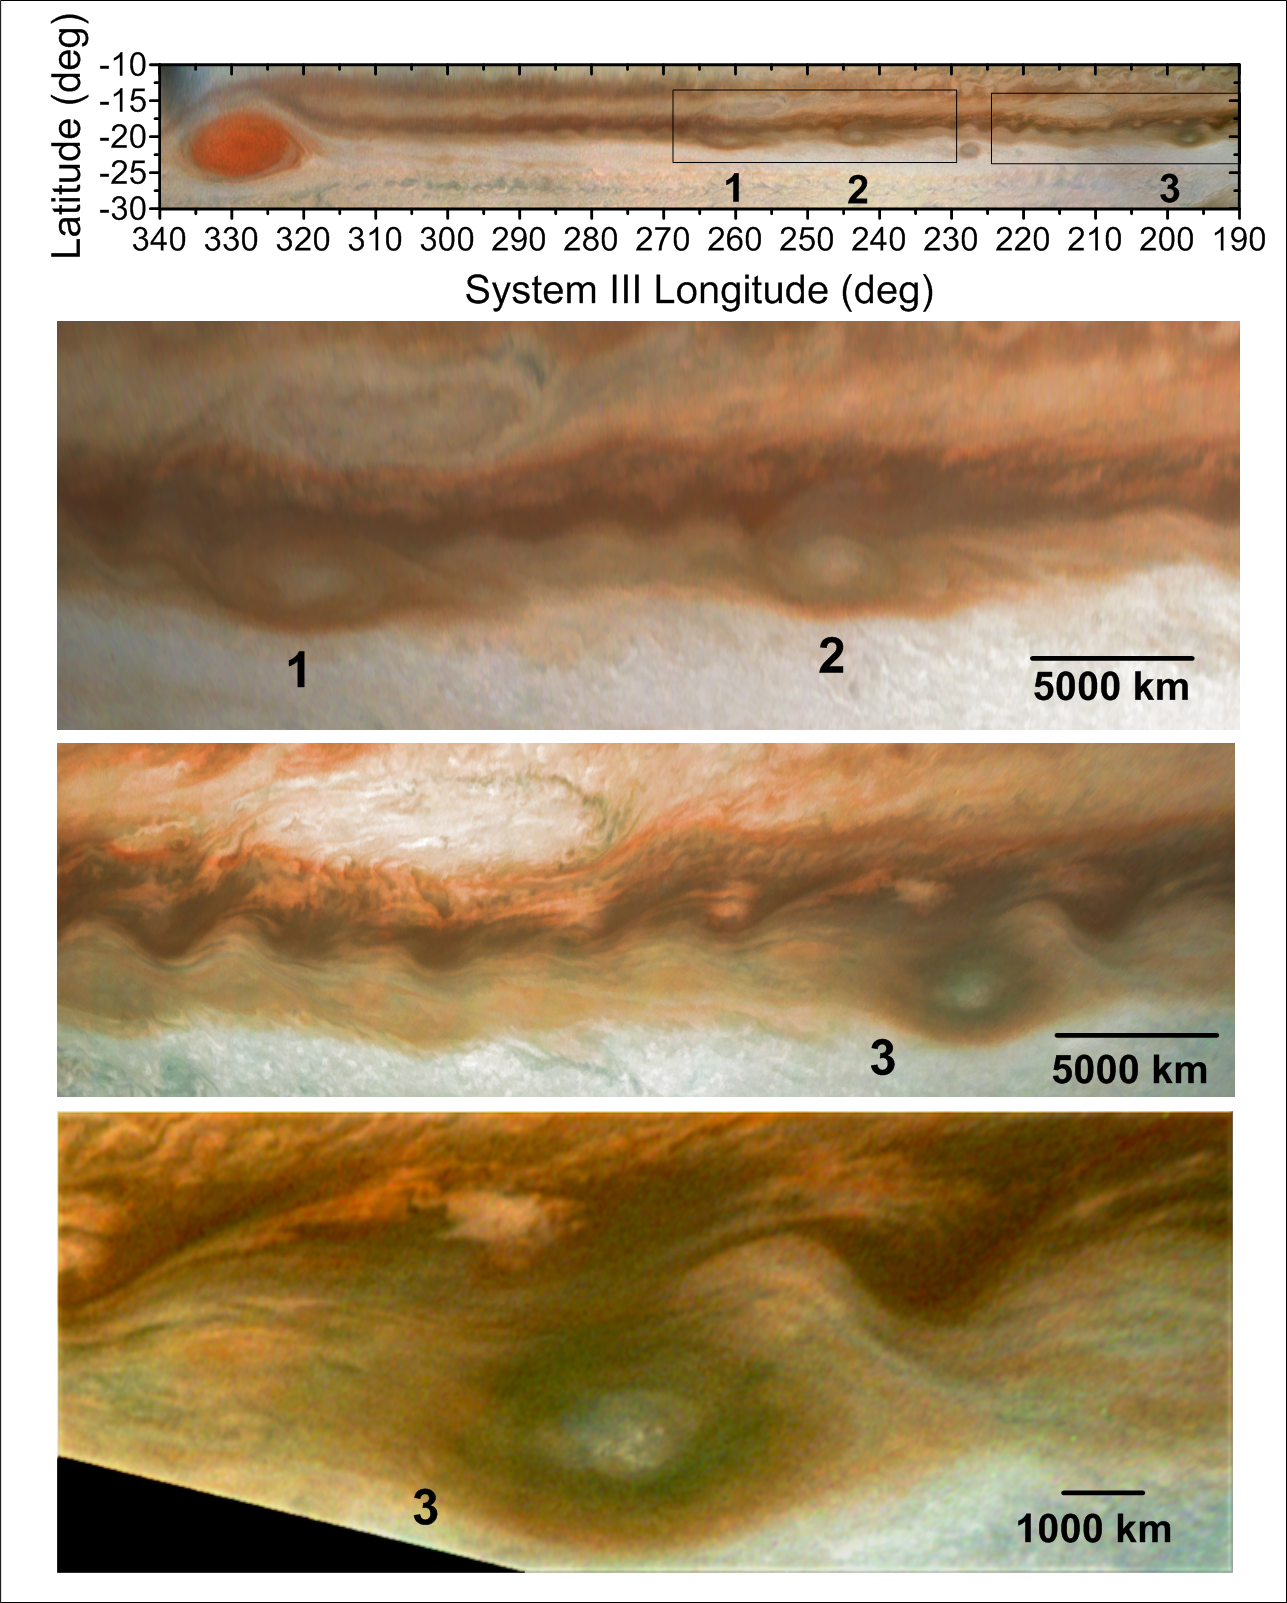 Photos of Jupiter's anticyclone storms from 2019 at different magnification.